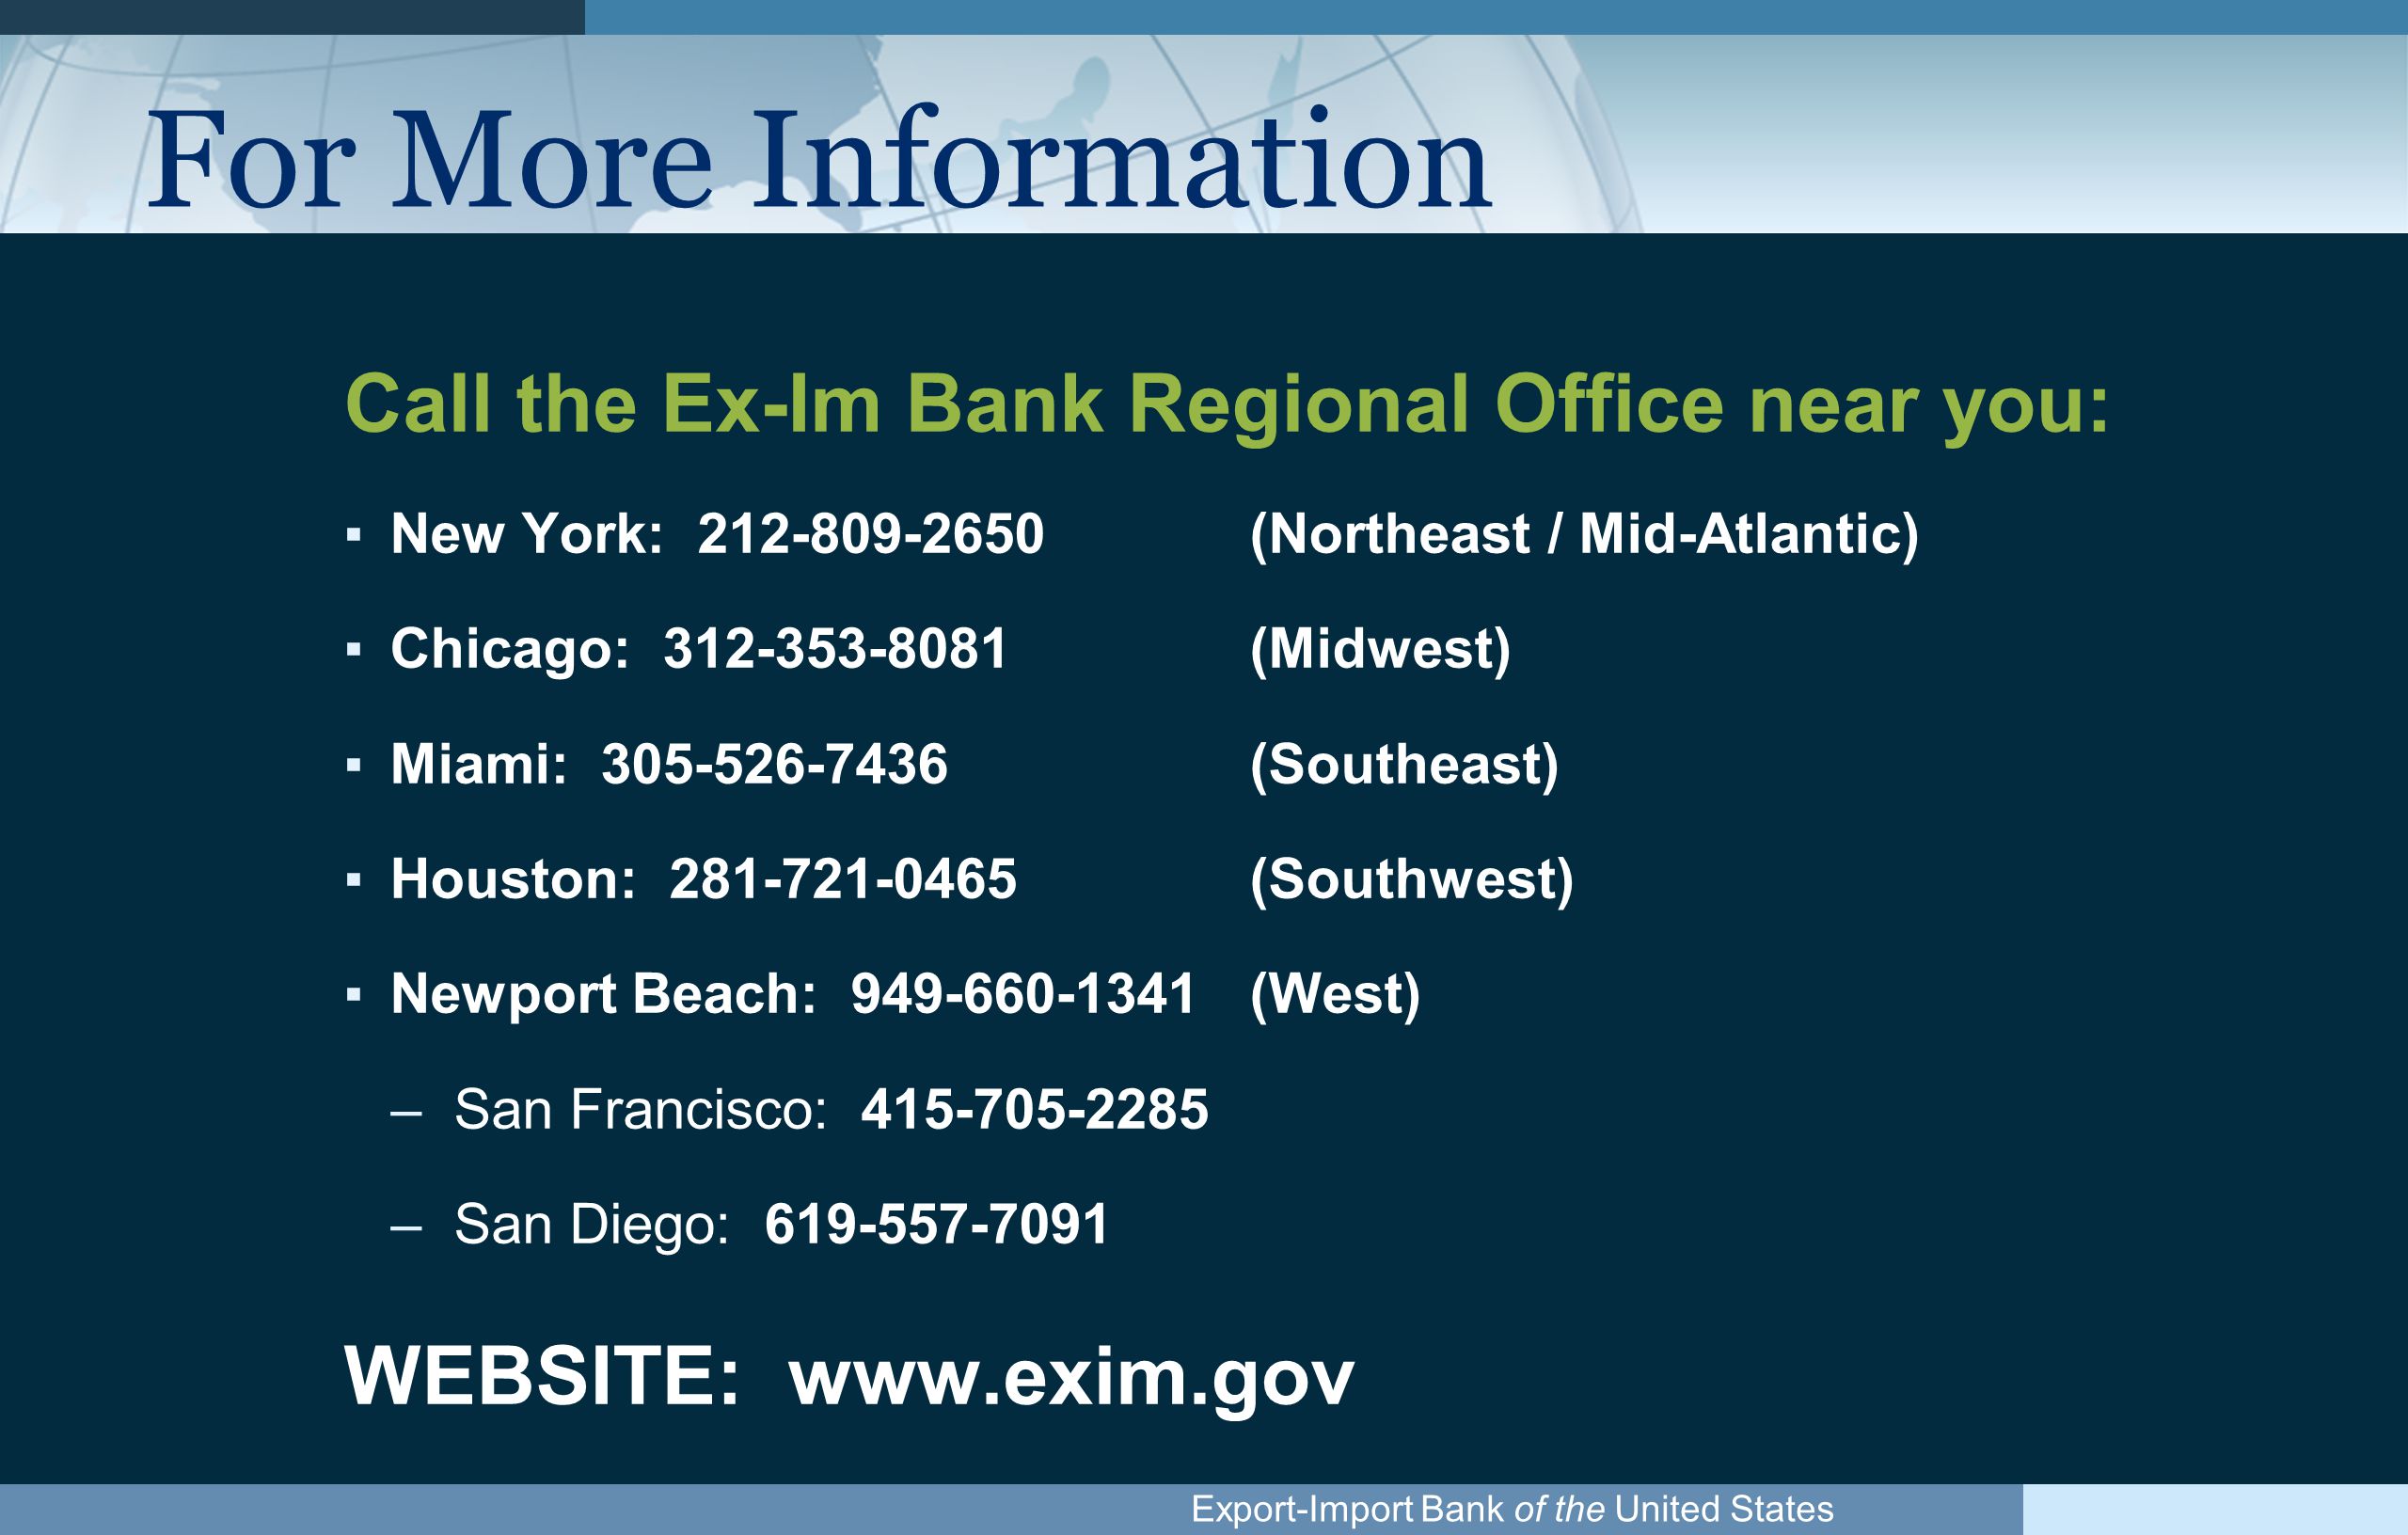 Export-Import Bank of the United States For More Information Call the Ex-Im Bank Regional Office near you: ▪New York: (Northeast / Mid-Atlantic) ▪Chicago: (Midwest) ▪Miami: (Southeast) ▪Houston: (Southwest) ▪Newport Beach: (West) –San Francisco: –San Diego: WEBSITE: